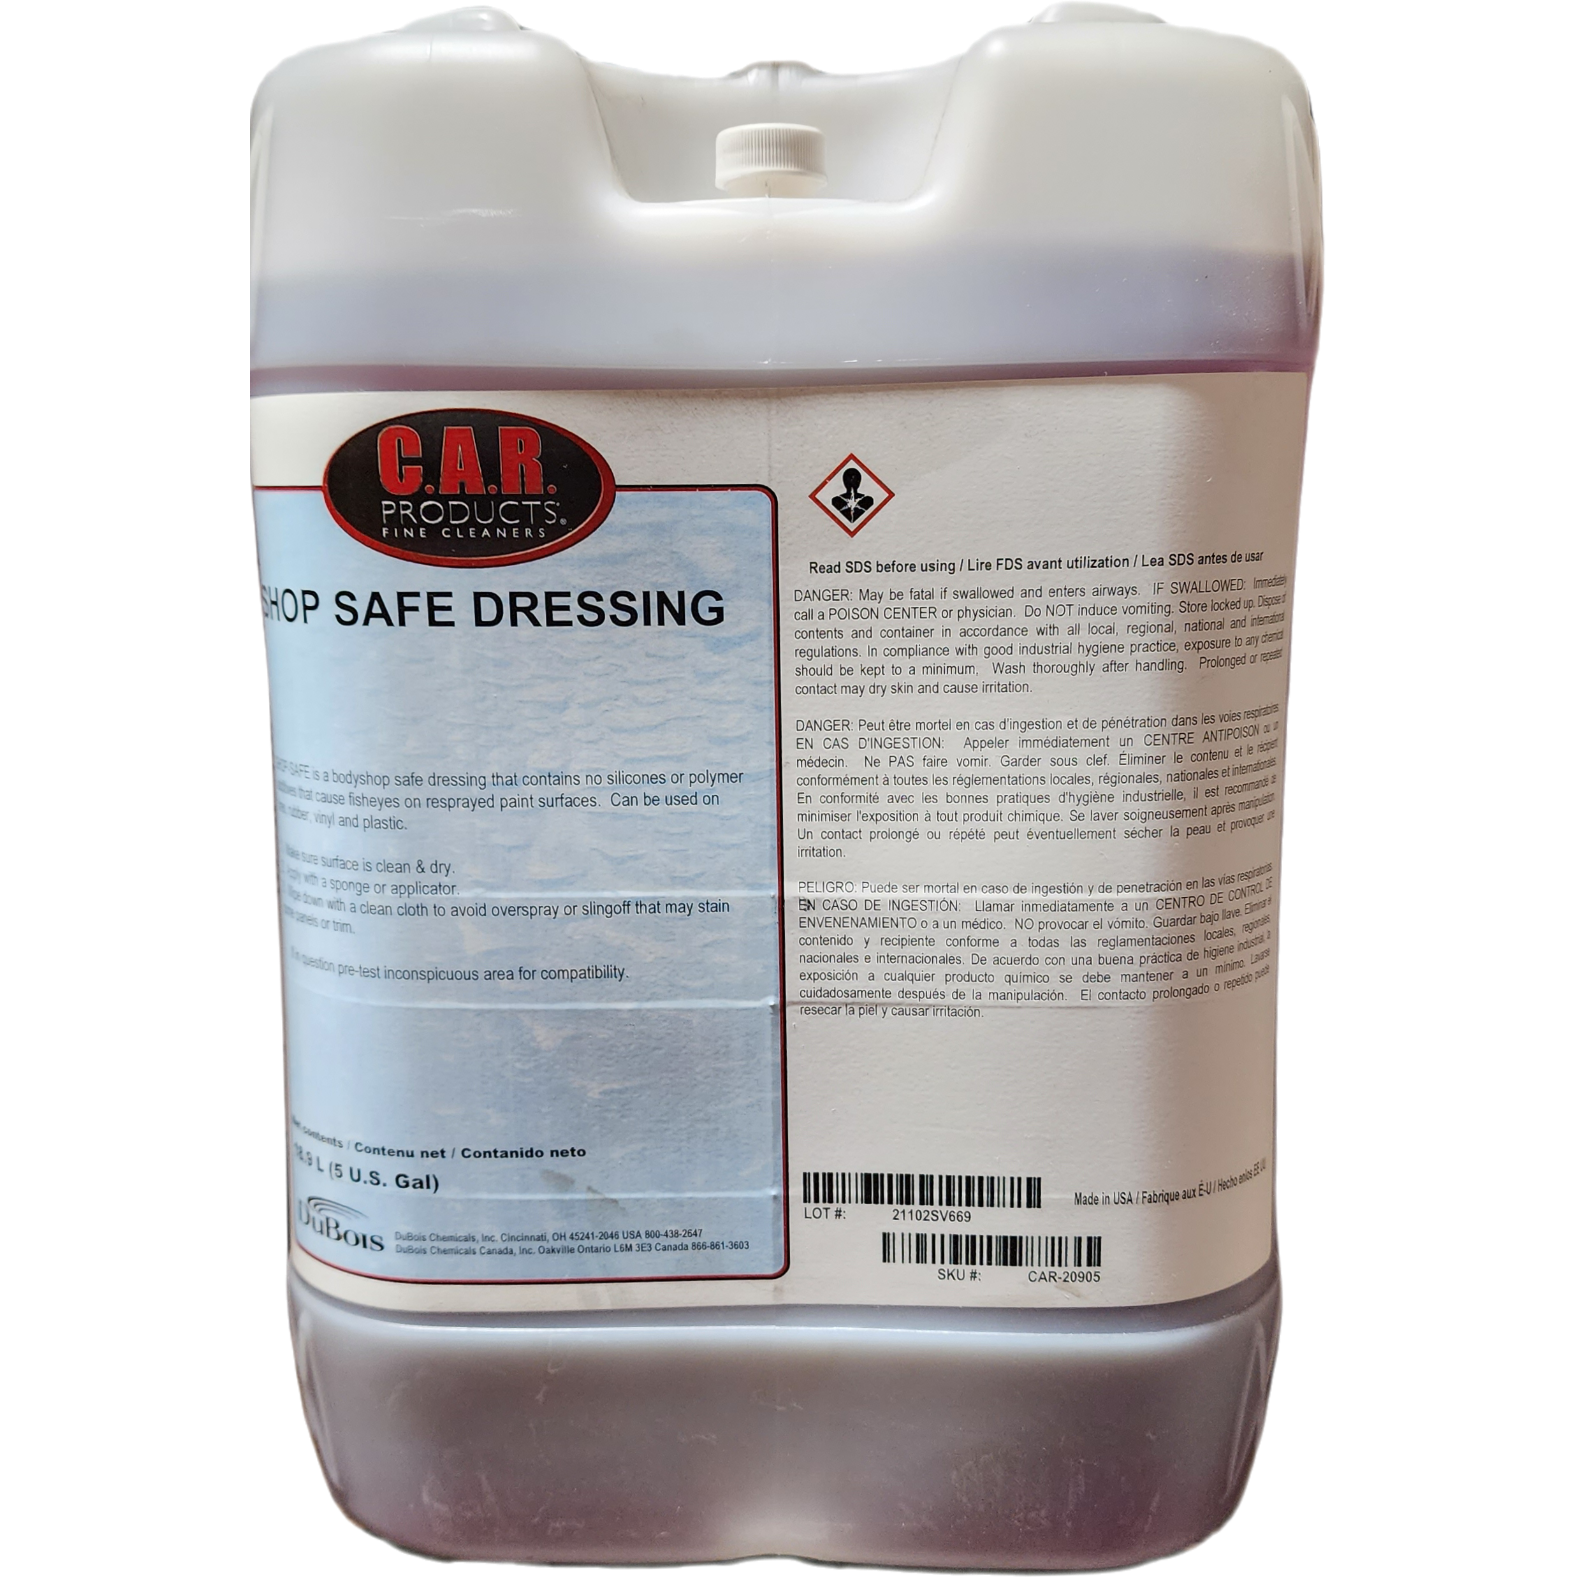 XCP CAR-20905 CAR Products Shop-Safe "Silicone Free" Dressing (5 gal)